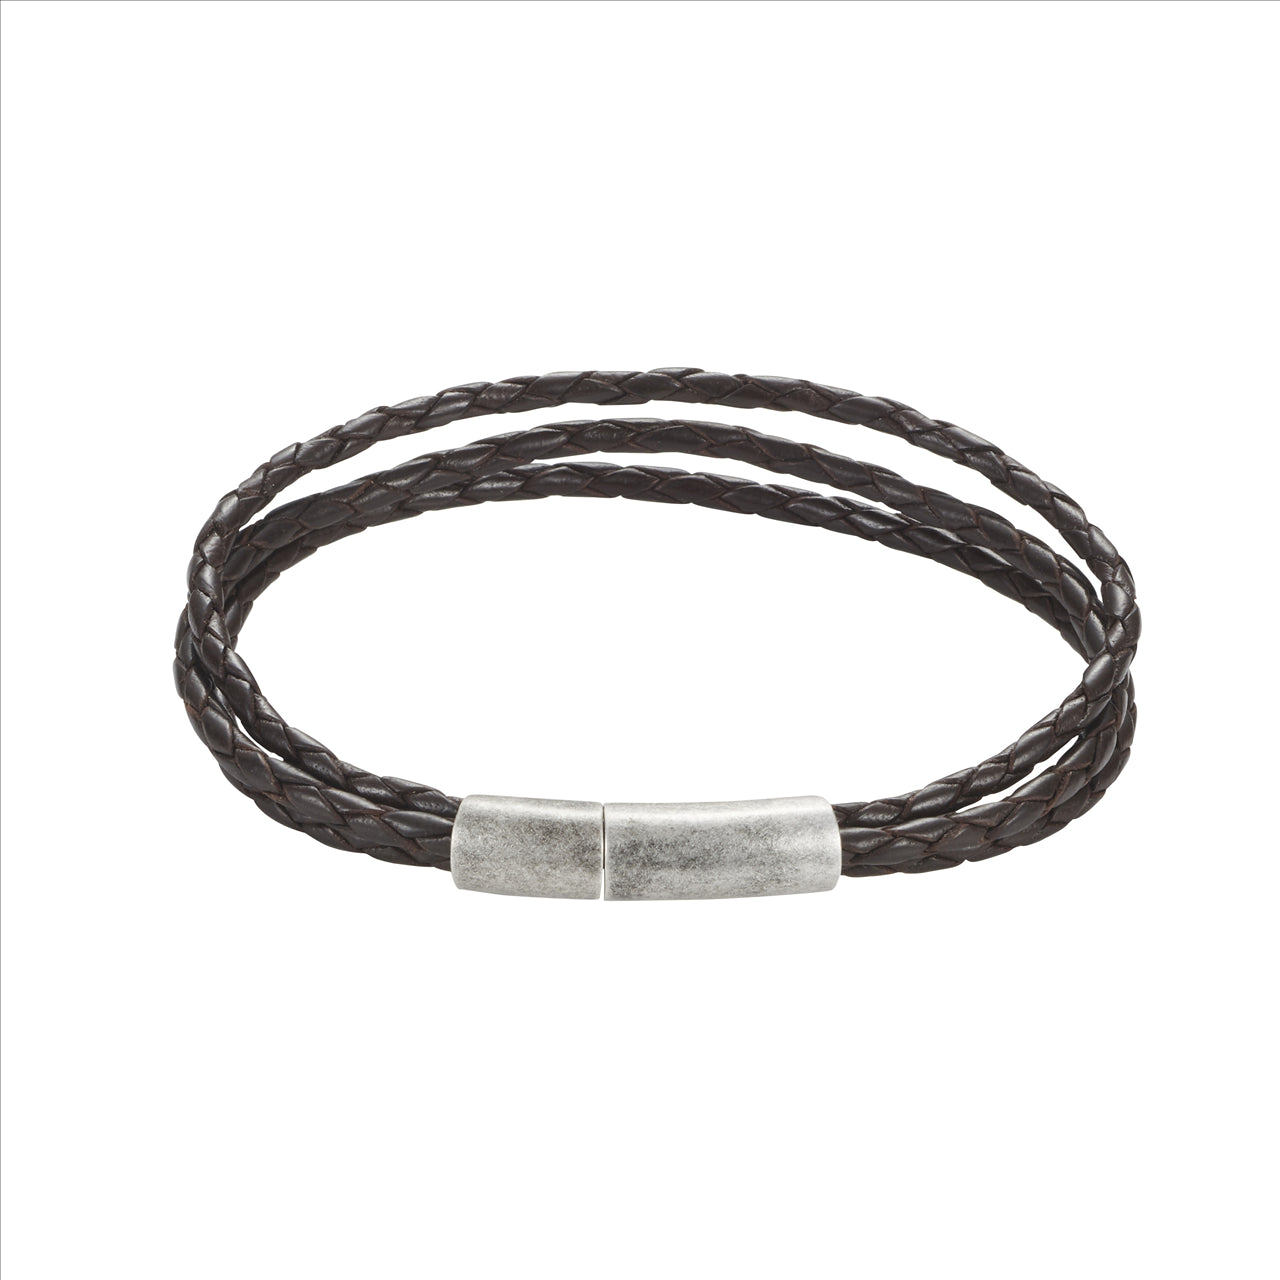 Brown Leather Triple Strand Bracelet with Antique Plated Stainless Steel Clasp